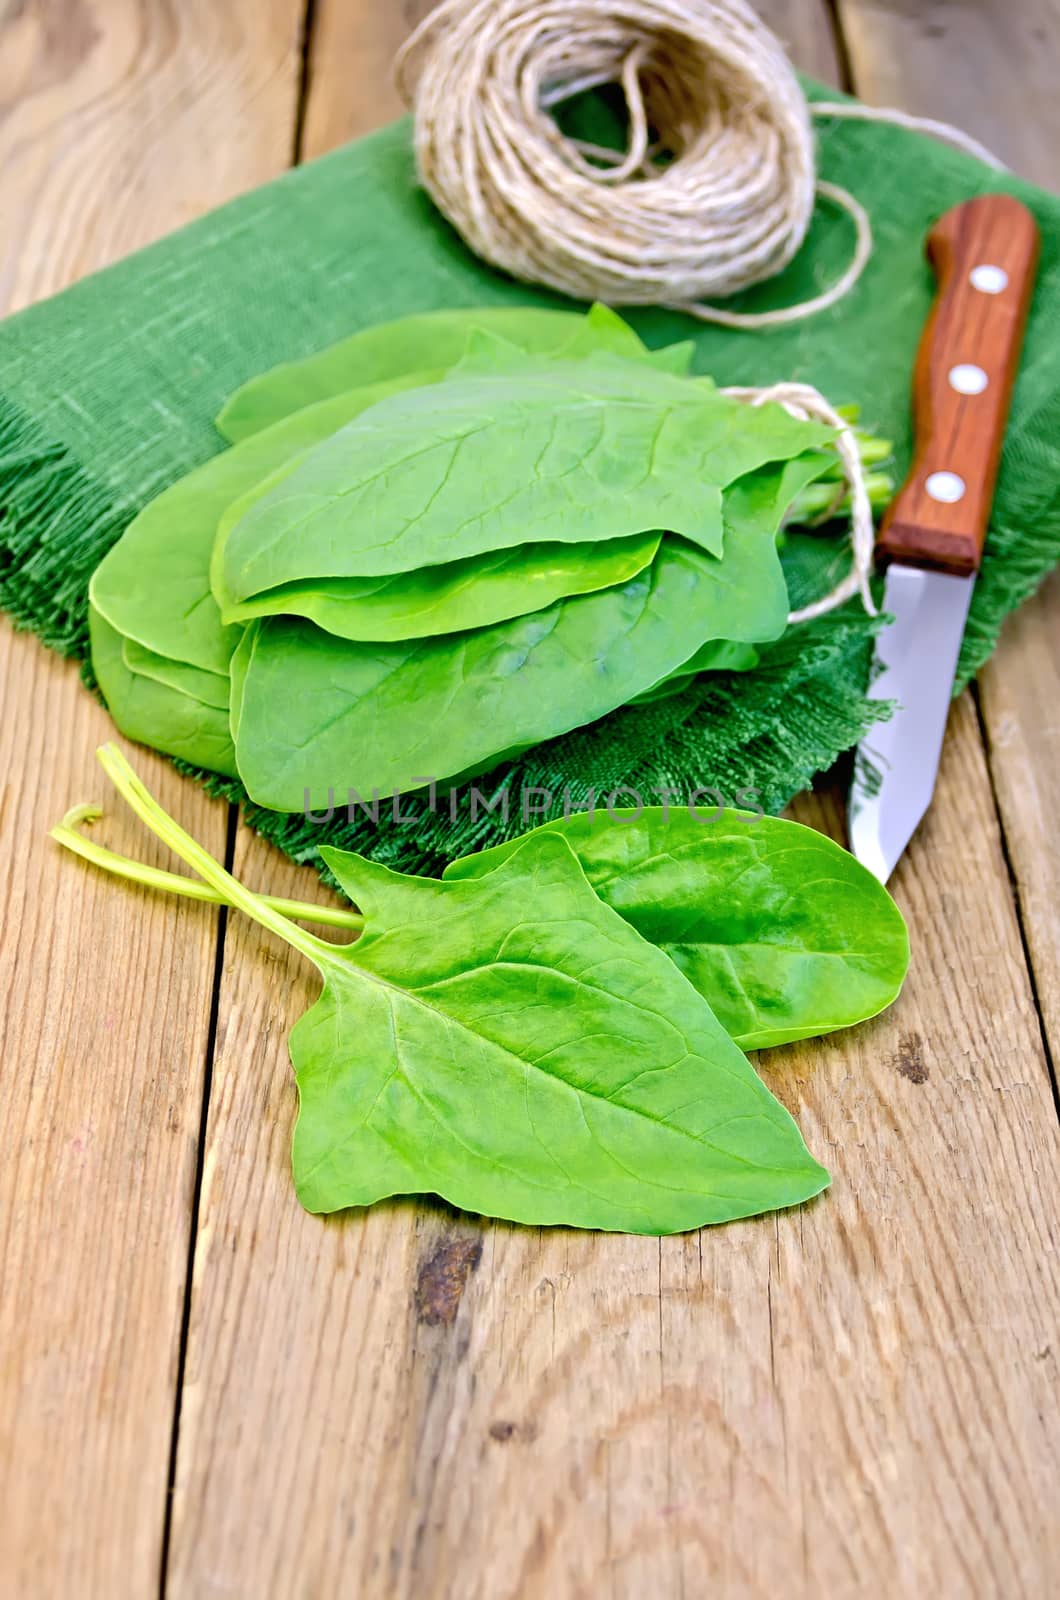 Green spinach, knife, twine, napkin on a wooden board